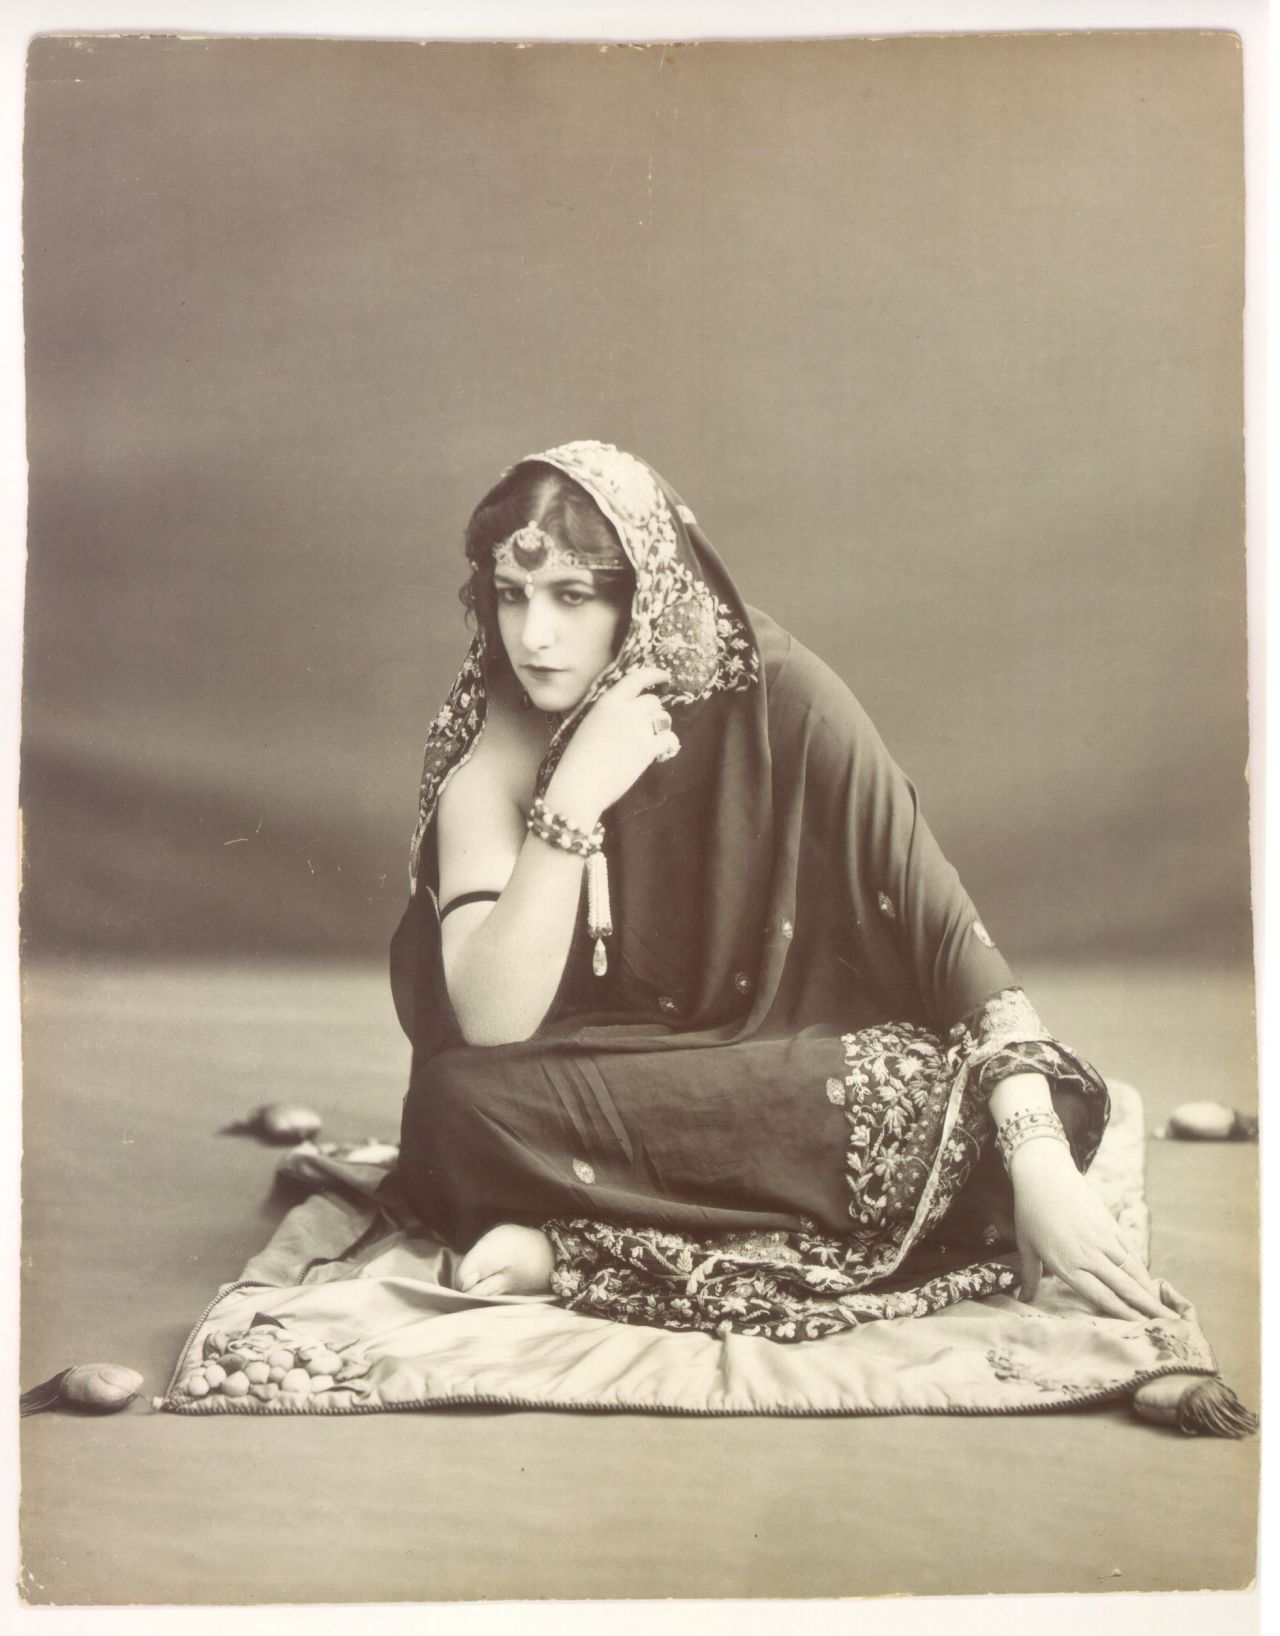 The Maharajas often commissioned valuable emerald jewelry for both themselves and their wives from top Paris jewelry houses. In this picture The Maharani of Kapurthala (born Anita Delgado) wears an emerald harem of the crescent in London in 1912.